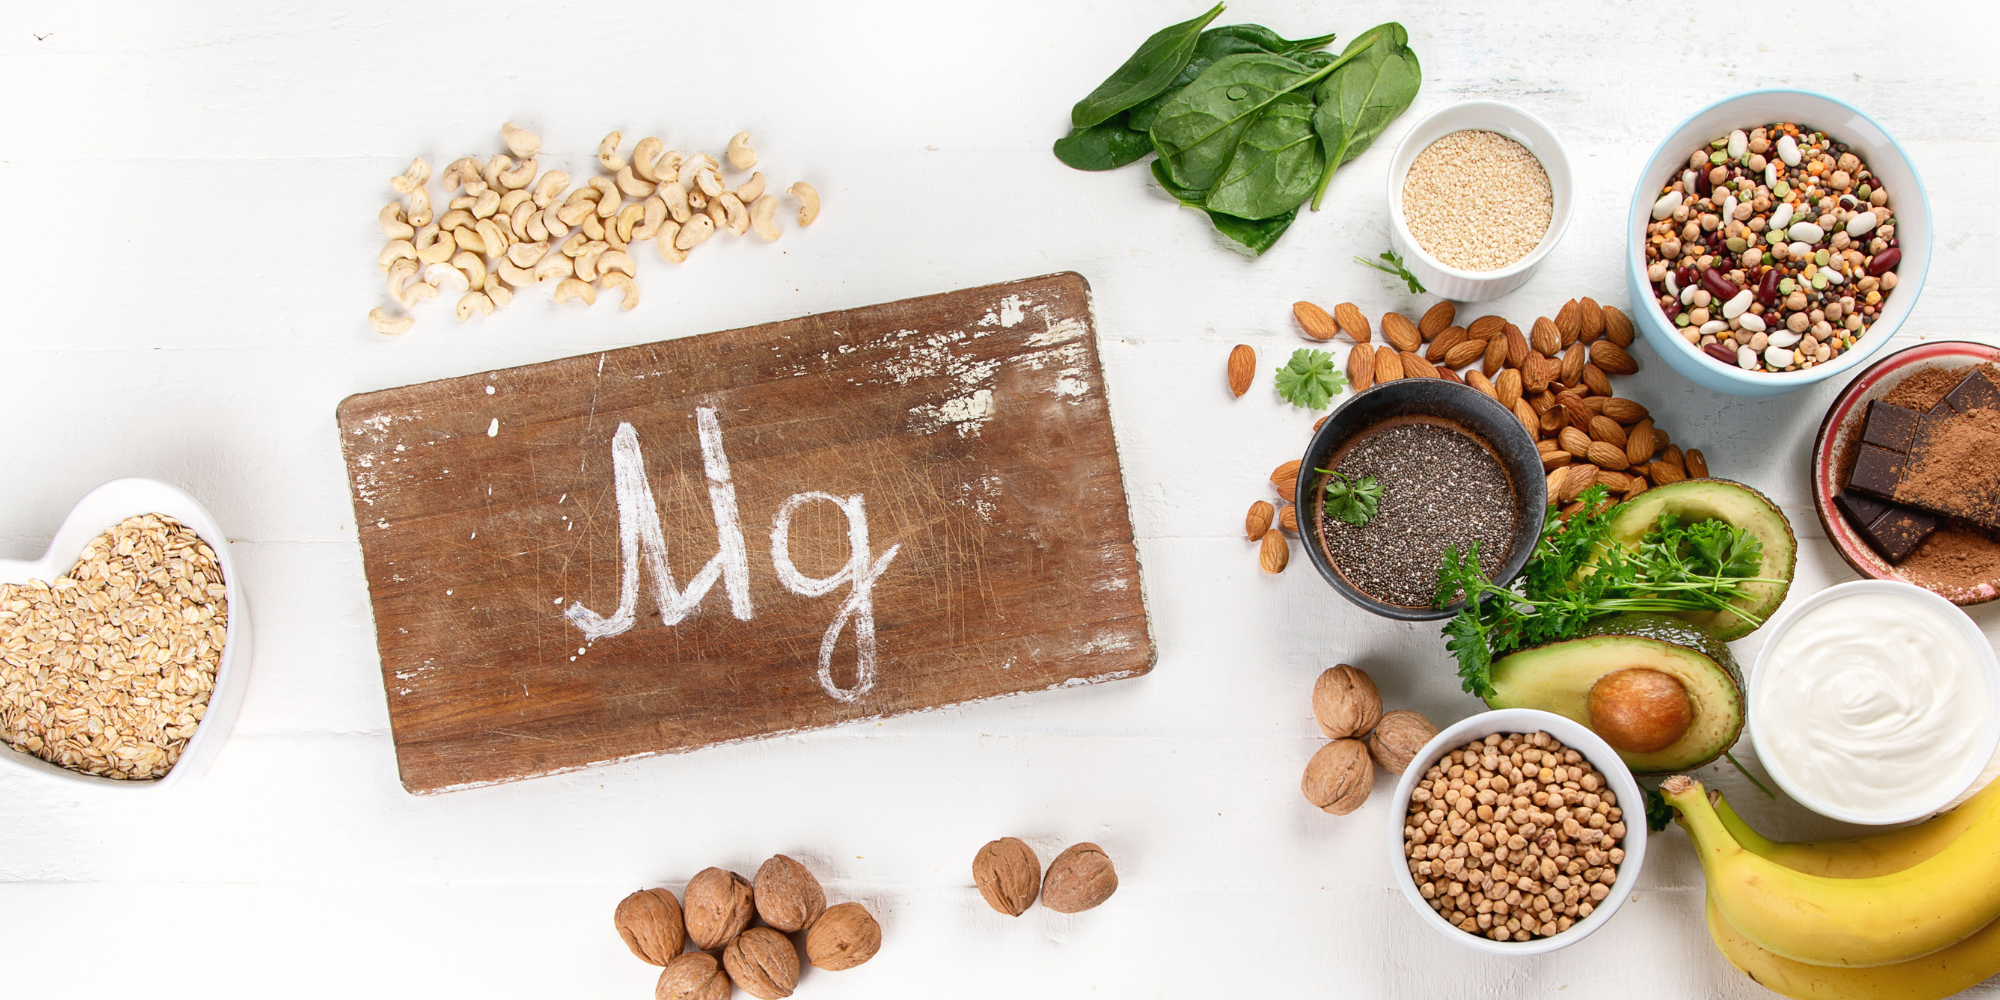 Various magnesium rich foods including dark chocolate, nuts, beans, spinach, chia seeds, and avocado, all around a sign on a cutting board that reads "Mg". 